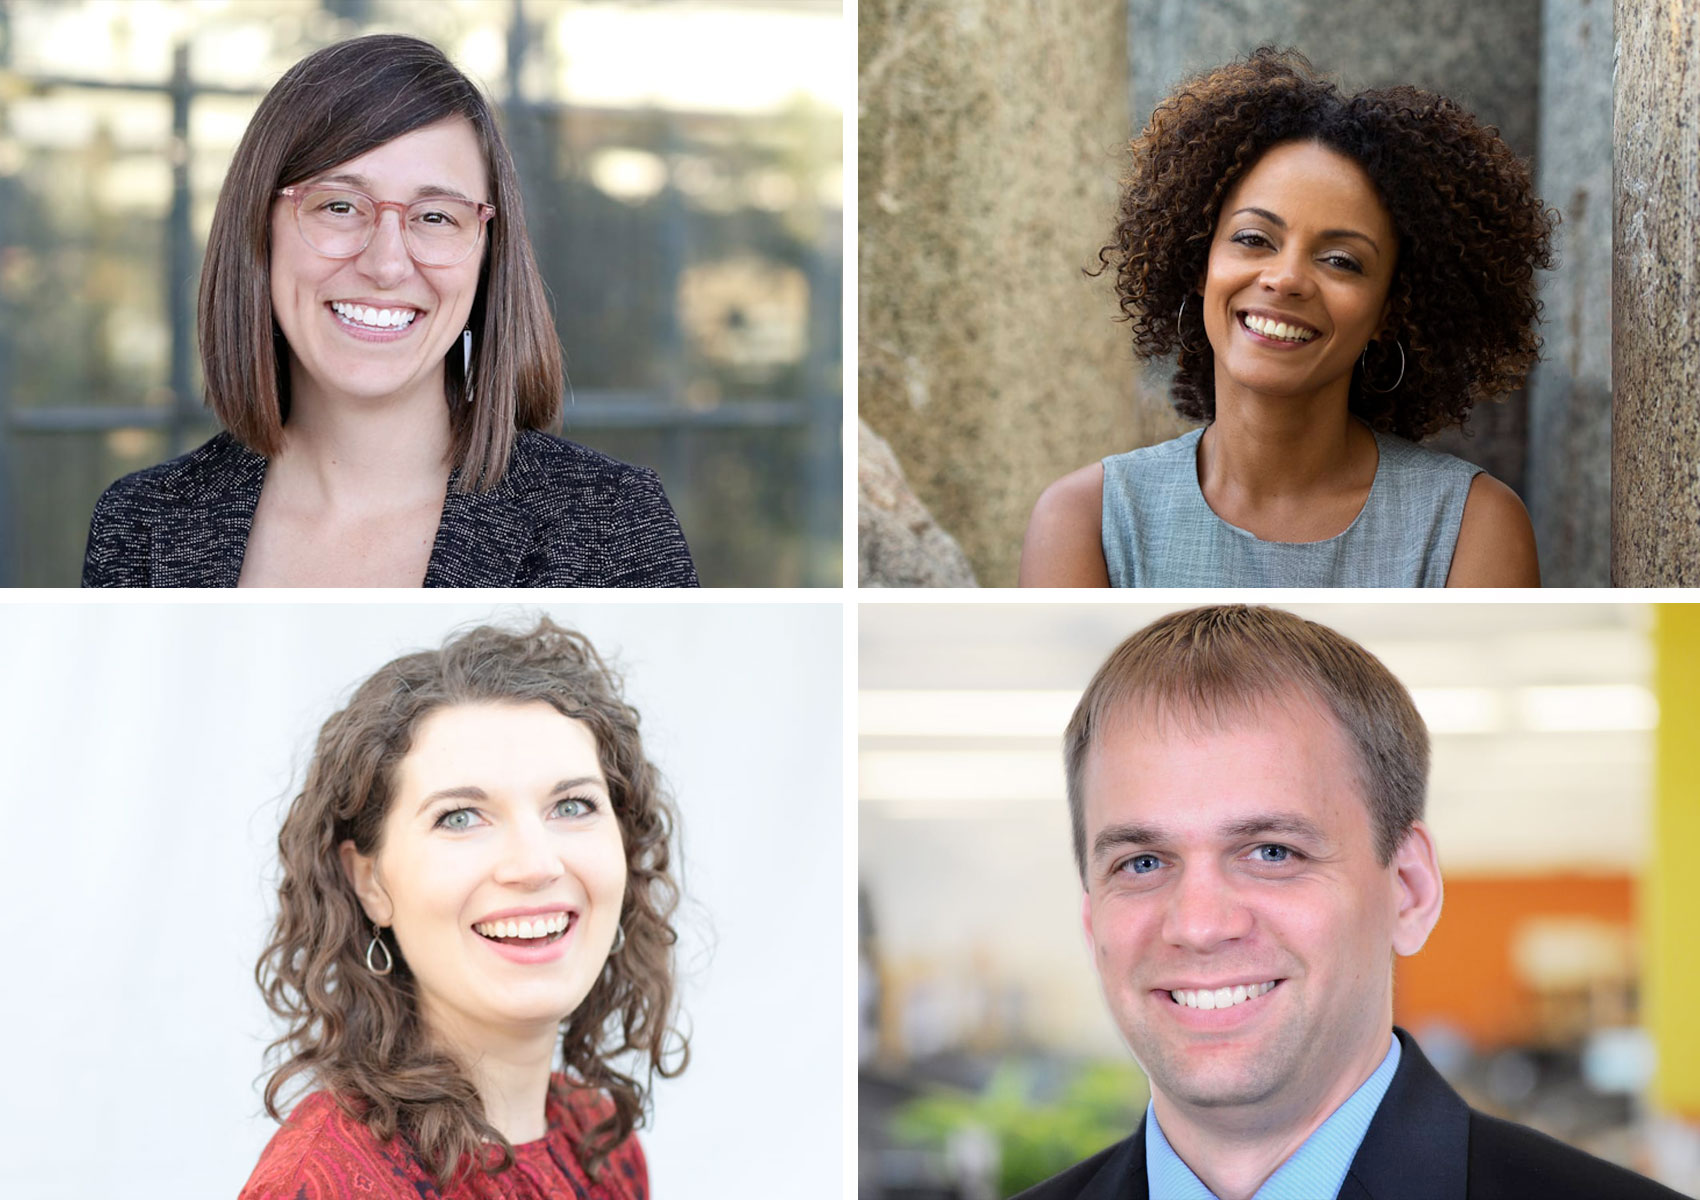 Four Minnesota Architects Receive the 2020 AIA Young Architects Award